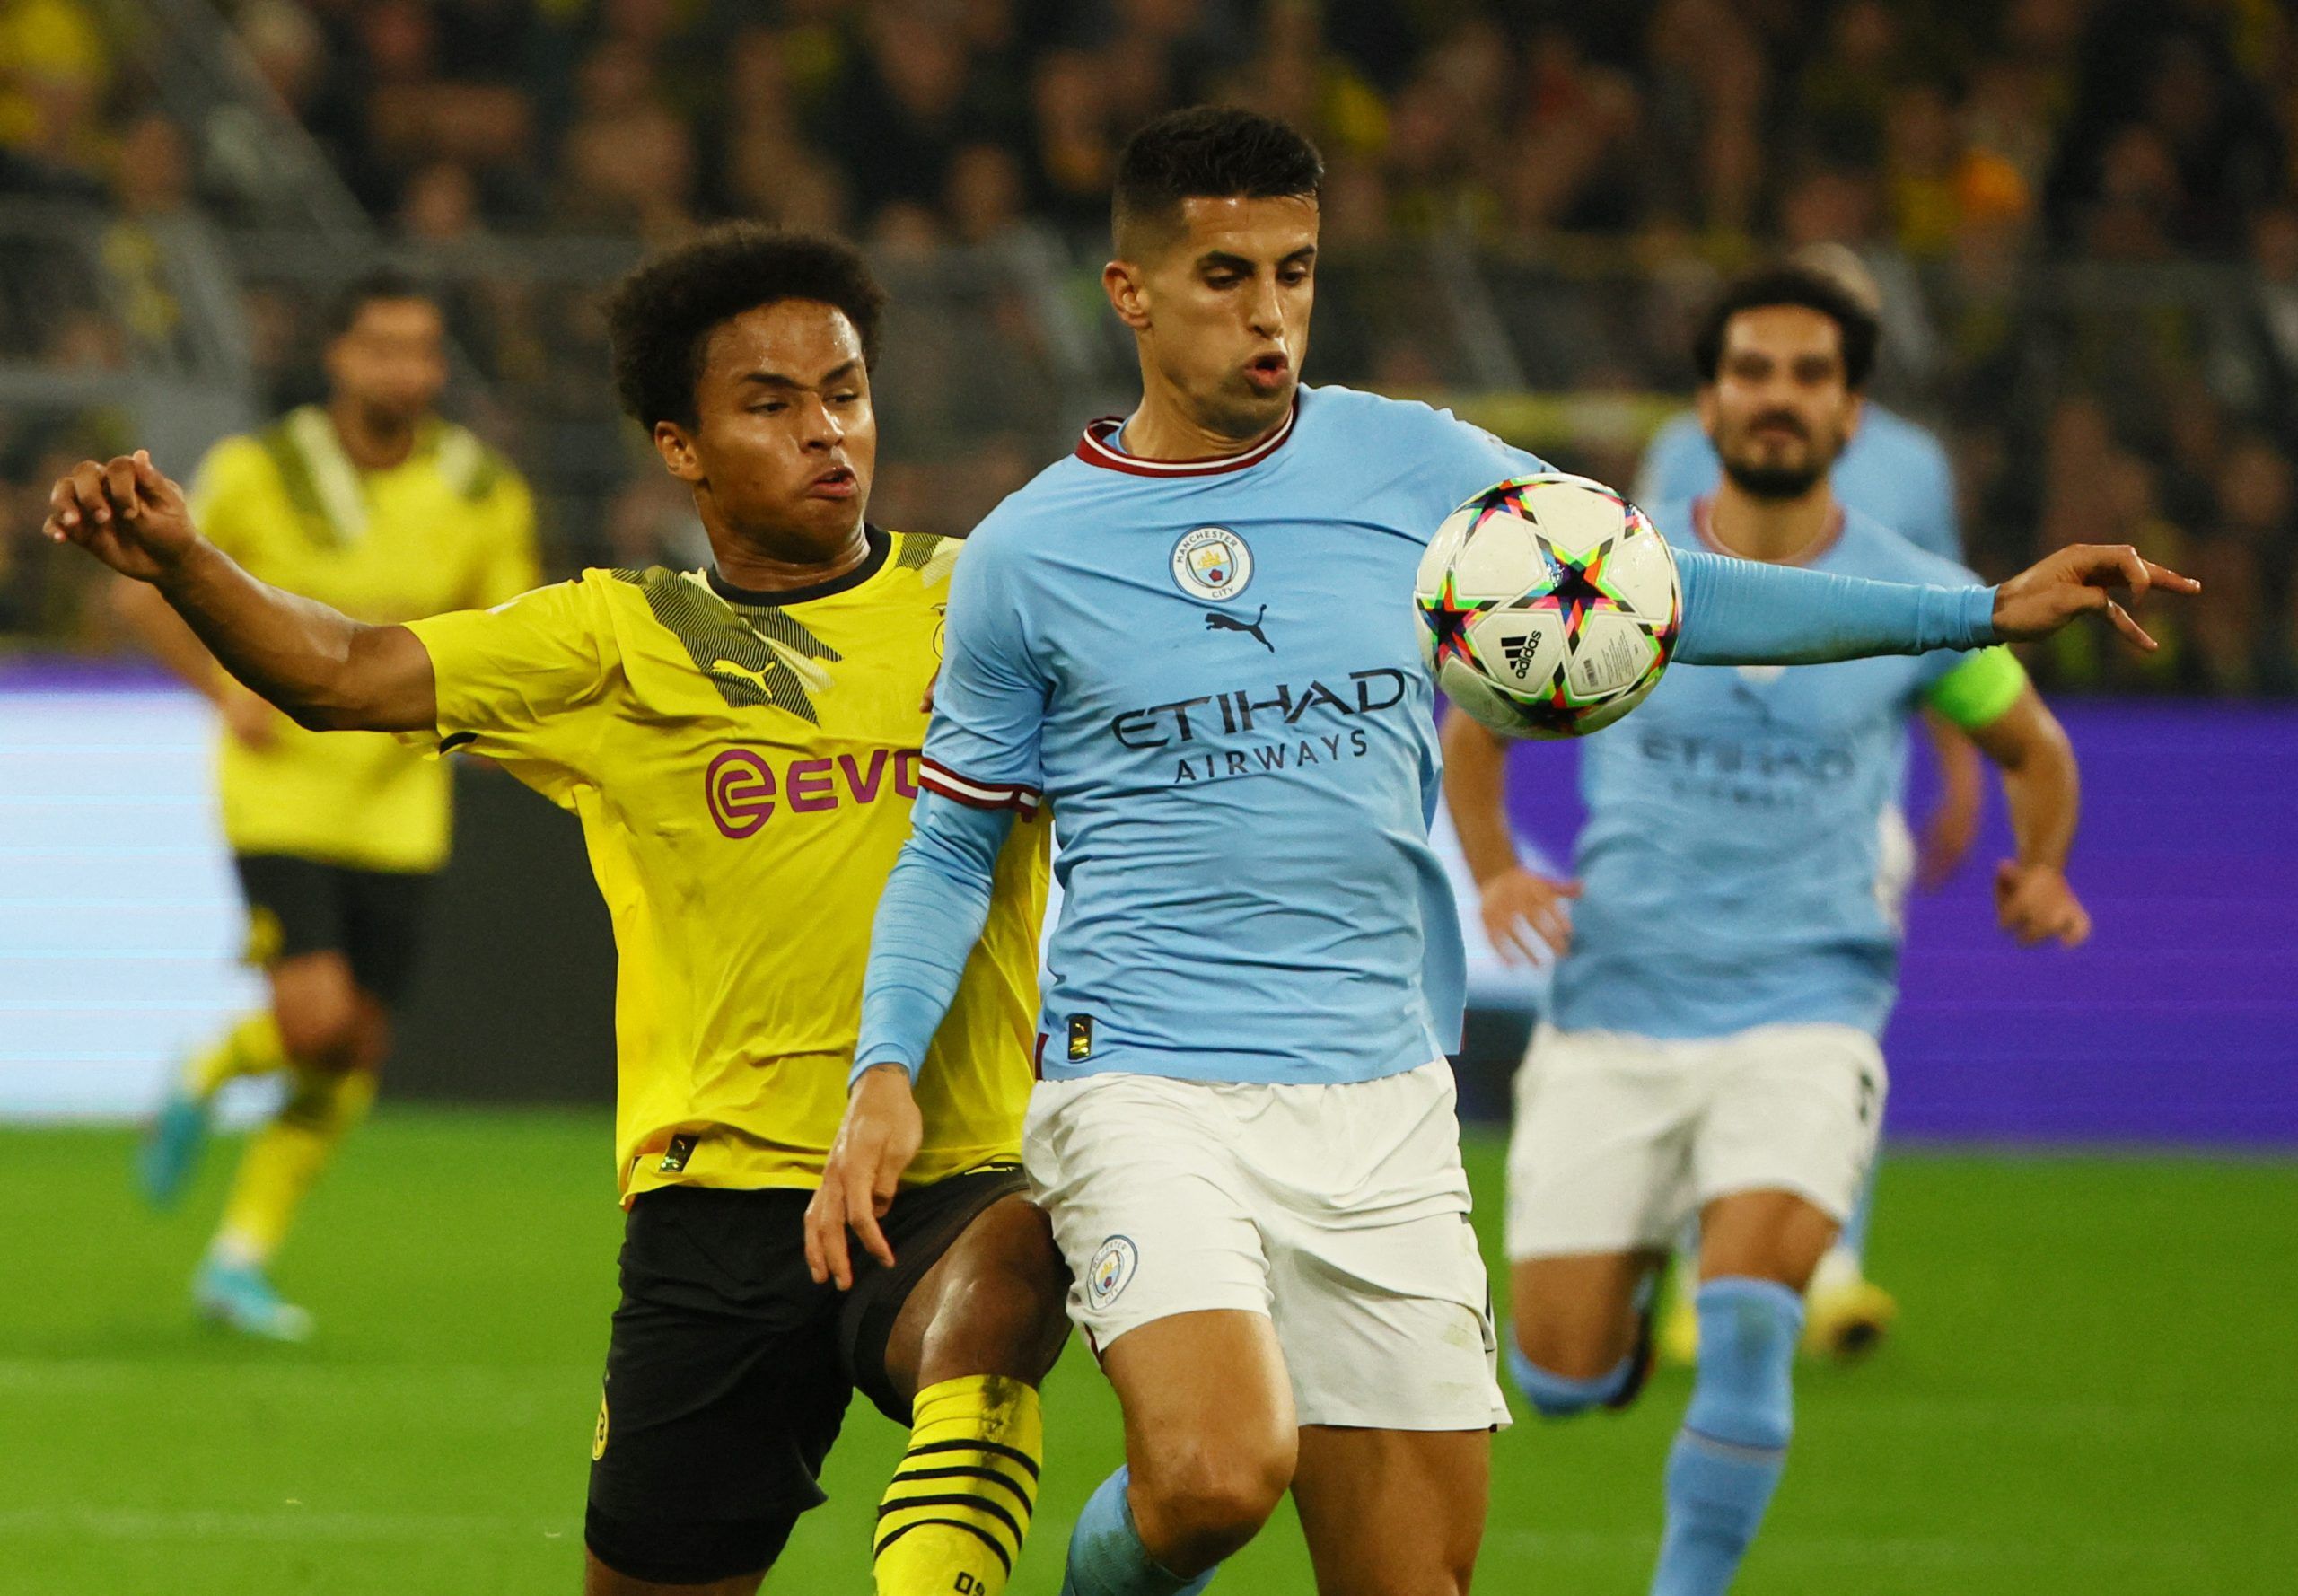 Soccer Football - Champions League - Group G - Borussia Dortmund v Manchester City - Signal Iduna Park, Dortmund, Germany - October 25, 2022 Borussia Dortmund's Karim Adeyemi in action with Manchester City's Joao Cancelo REUTERS/Wolfgang Rattay